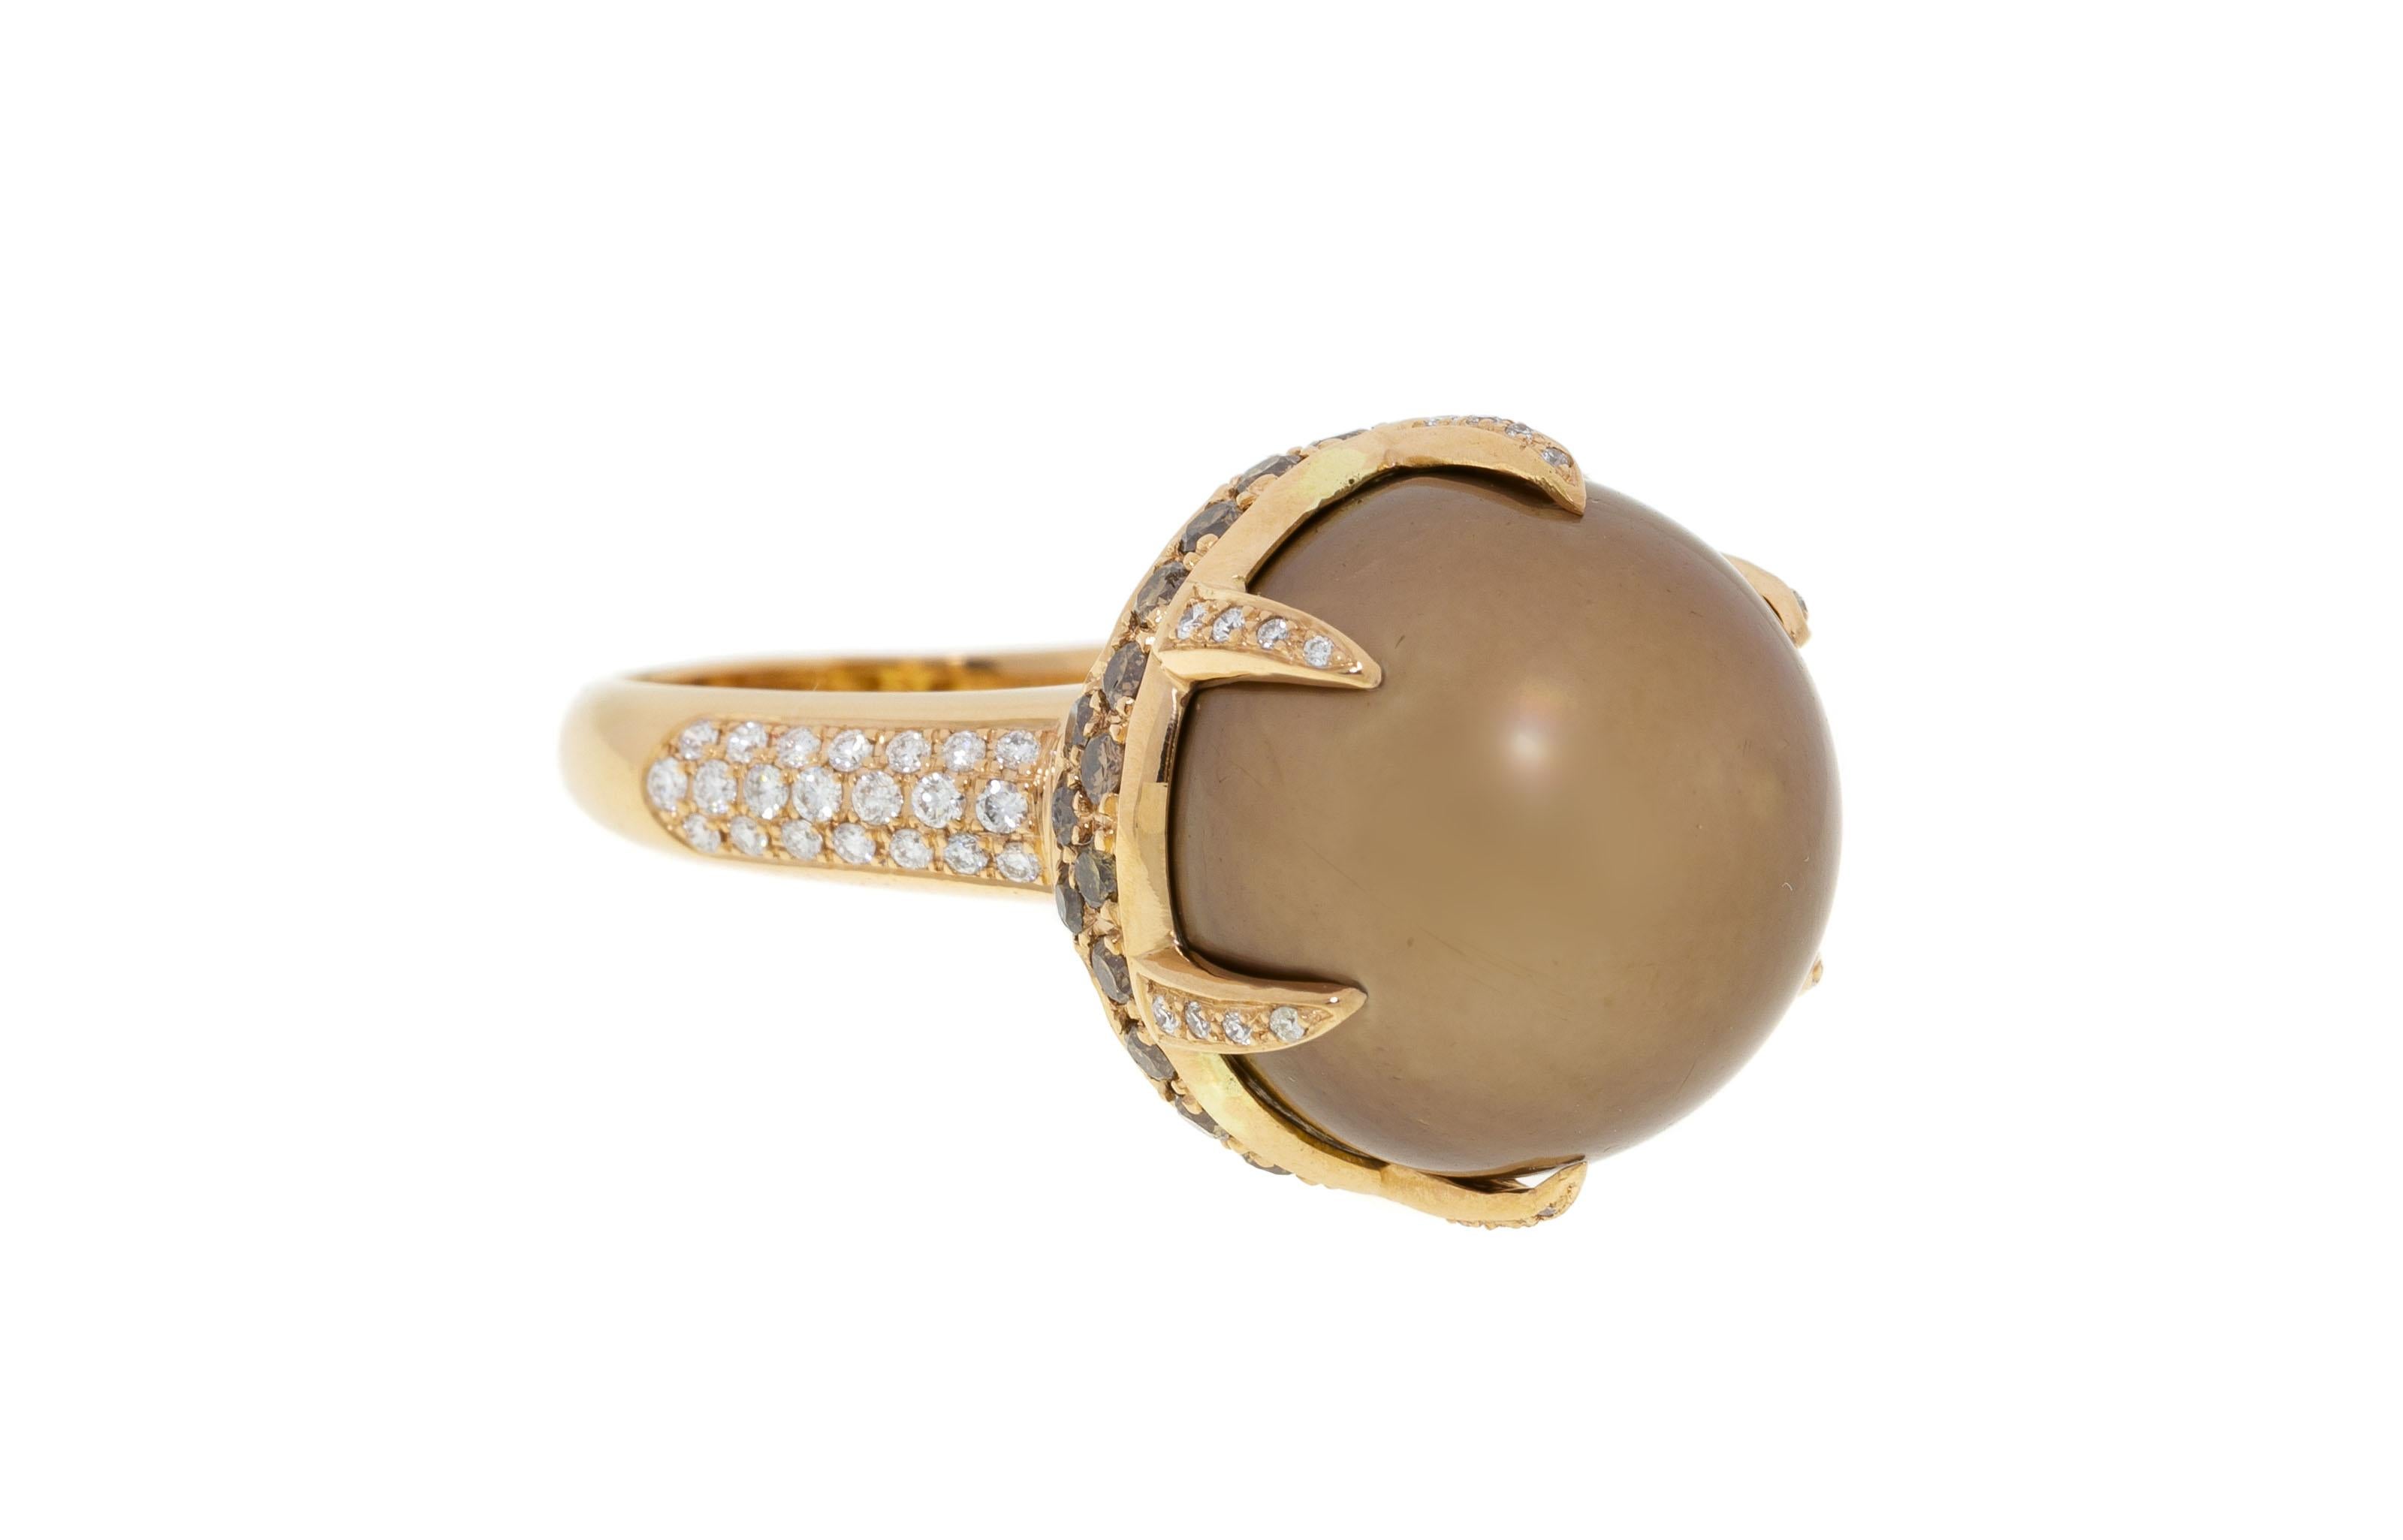 Gorgeous chocolate color pearl inlaid in a rose gold ring with white and black diamonds. The rare brown shade of the pearl is absolutely breathtaking. The warm color palette of the ring combines pink ocher chocolate and beige tones which always look